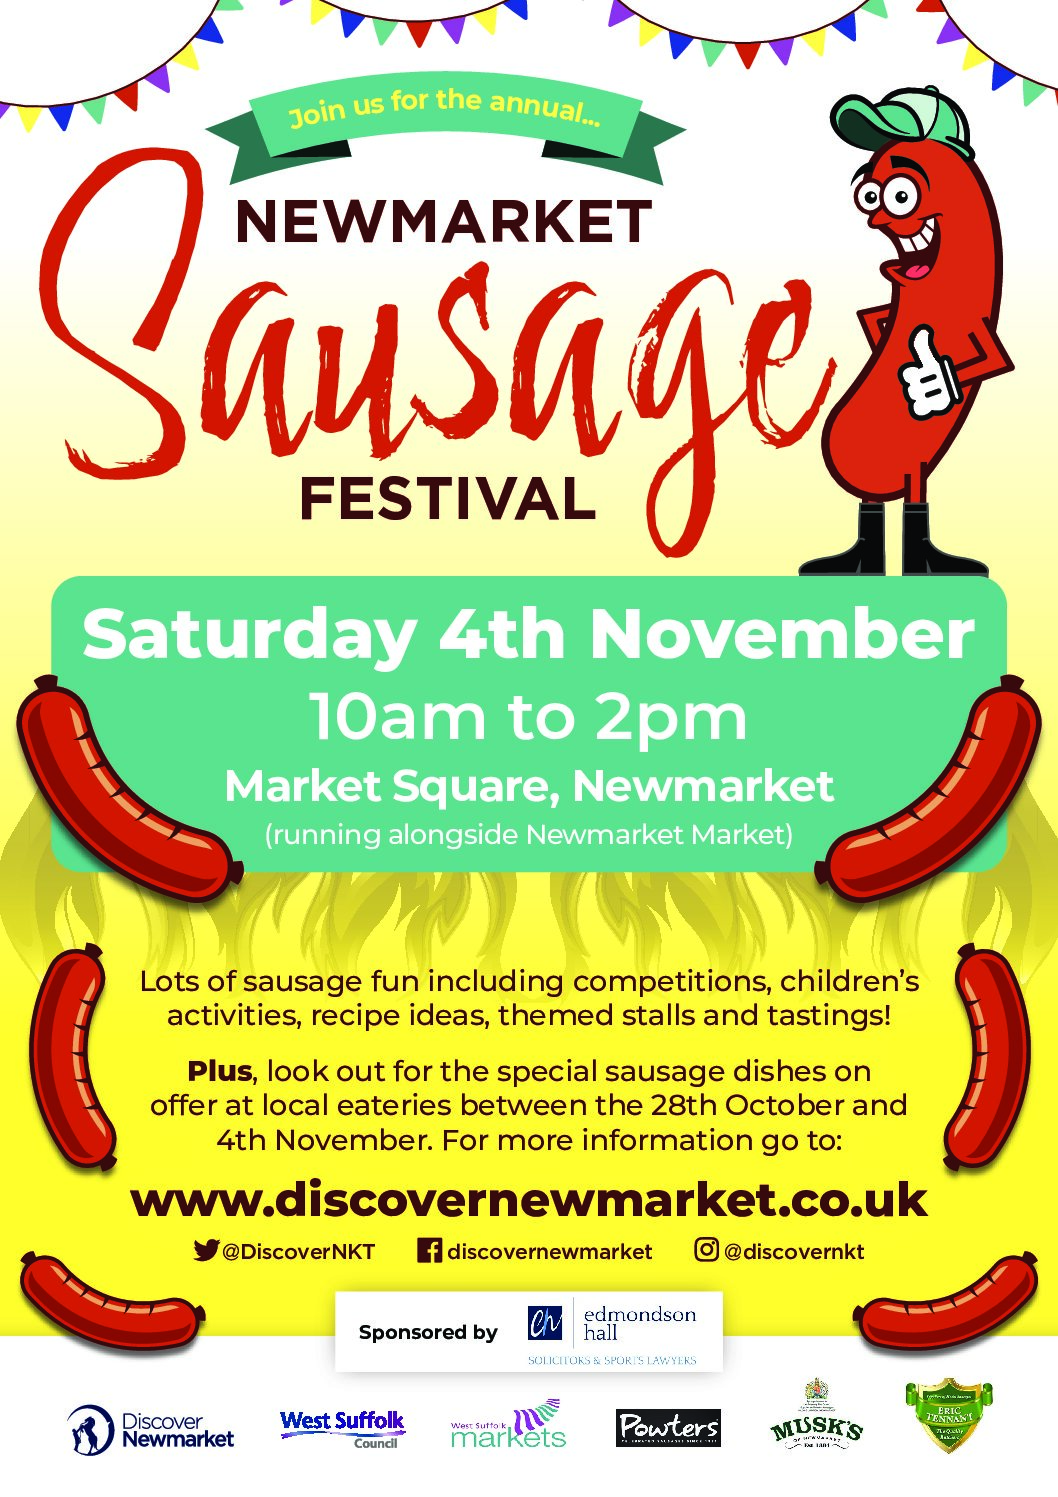 Newmarket Sausage Festival - Discover Newmarket - Discover Newmarket